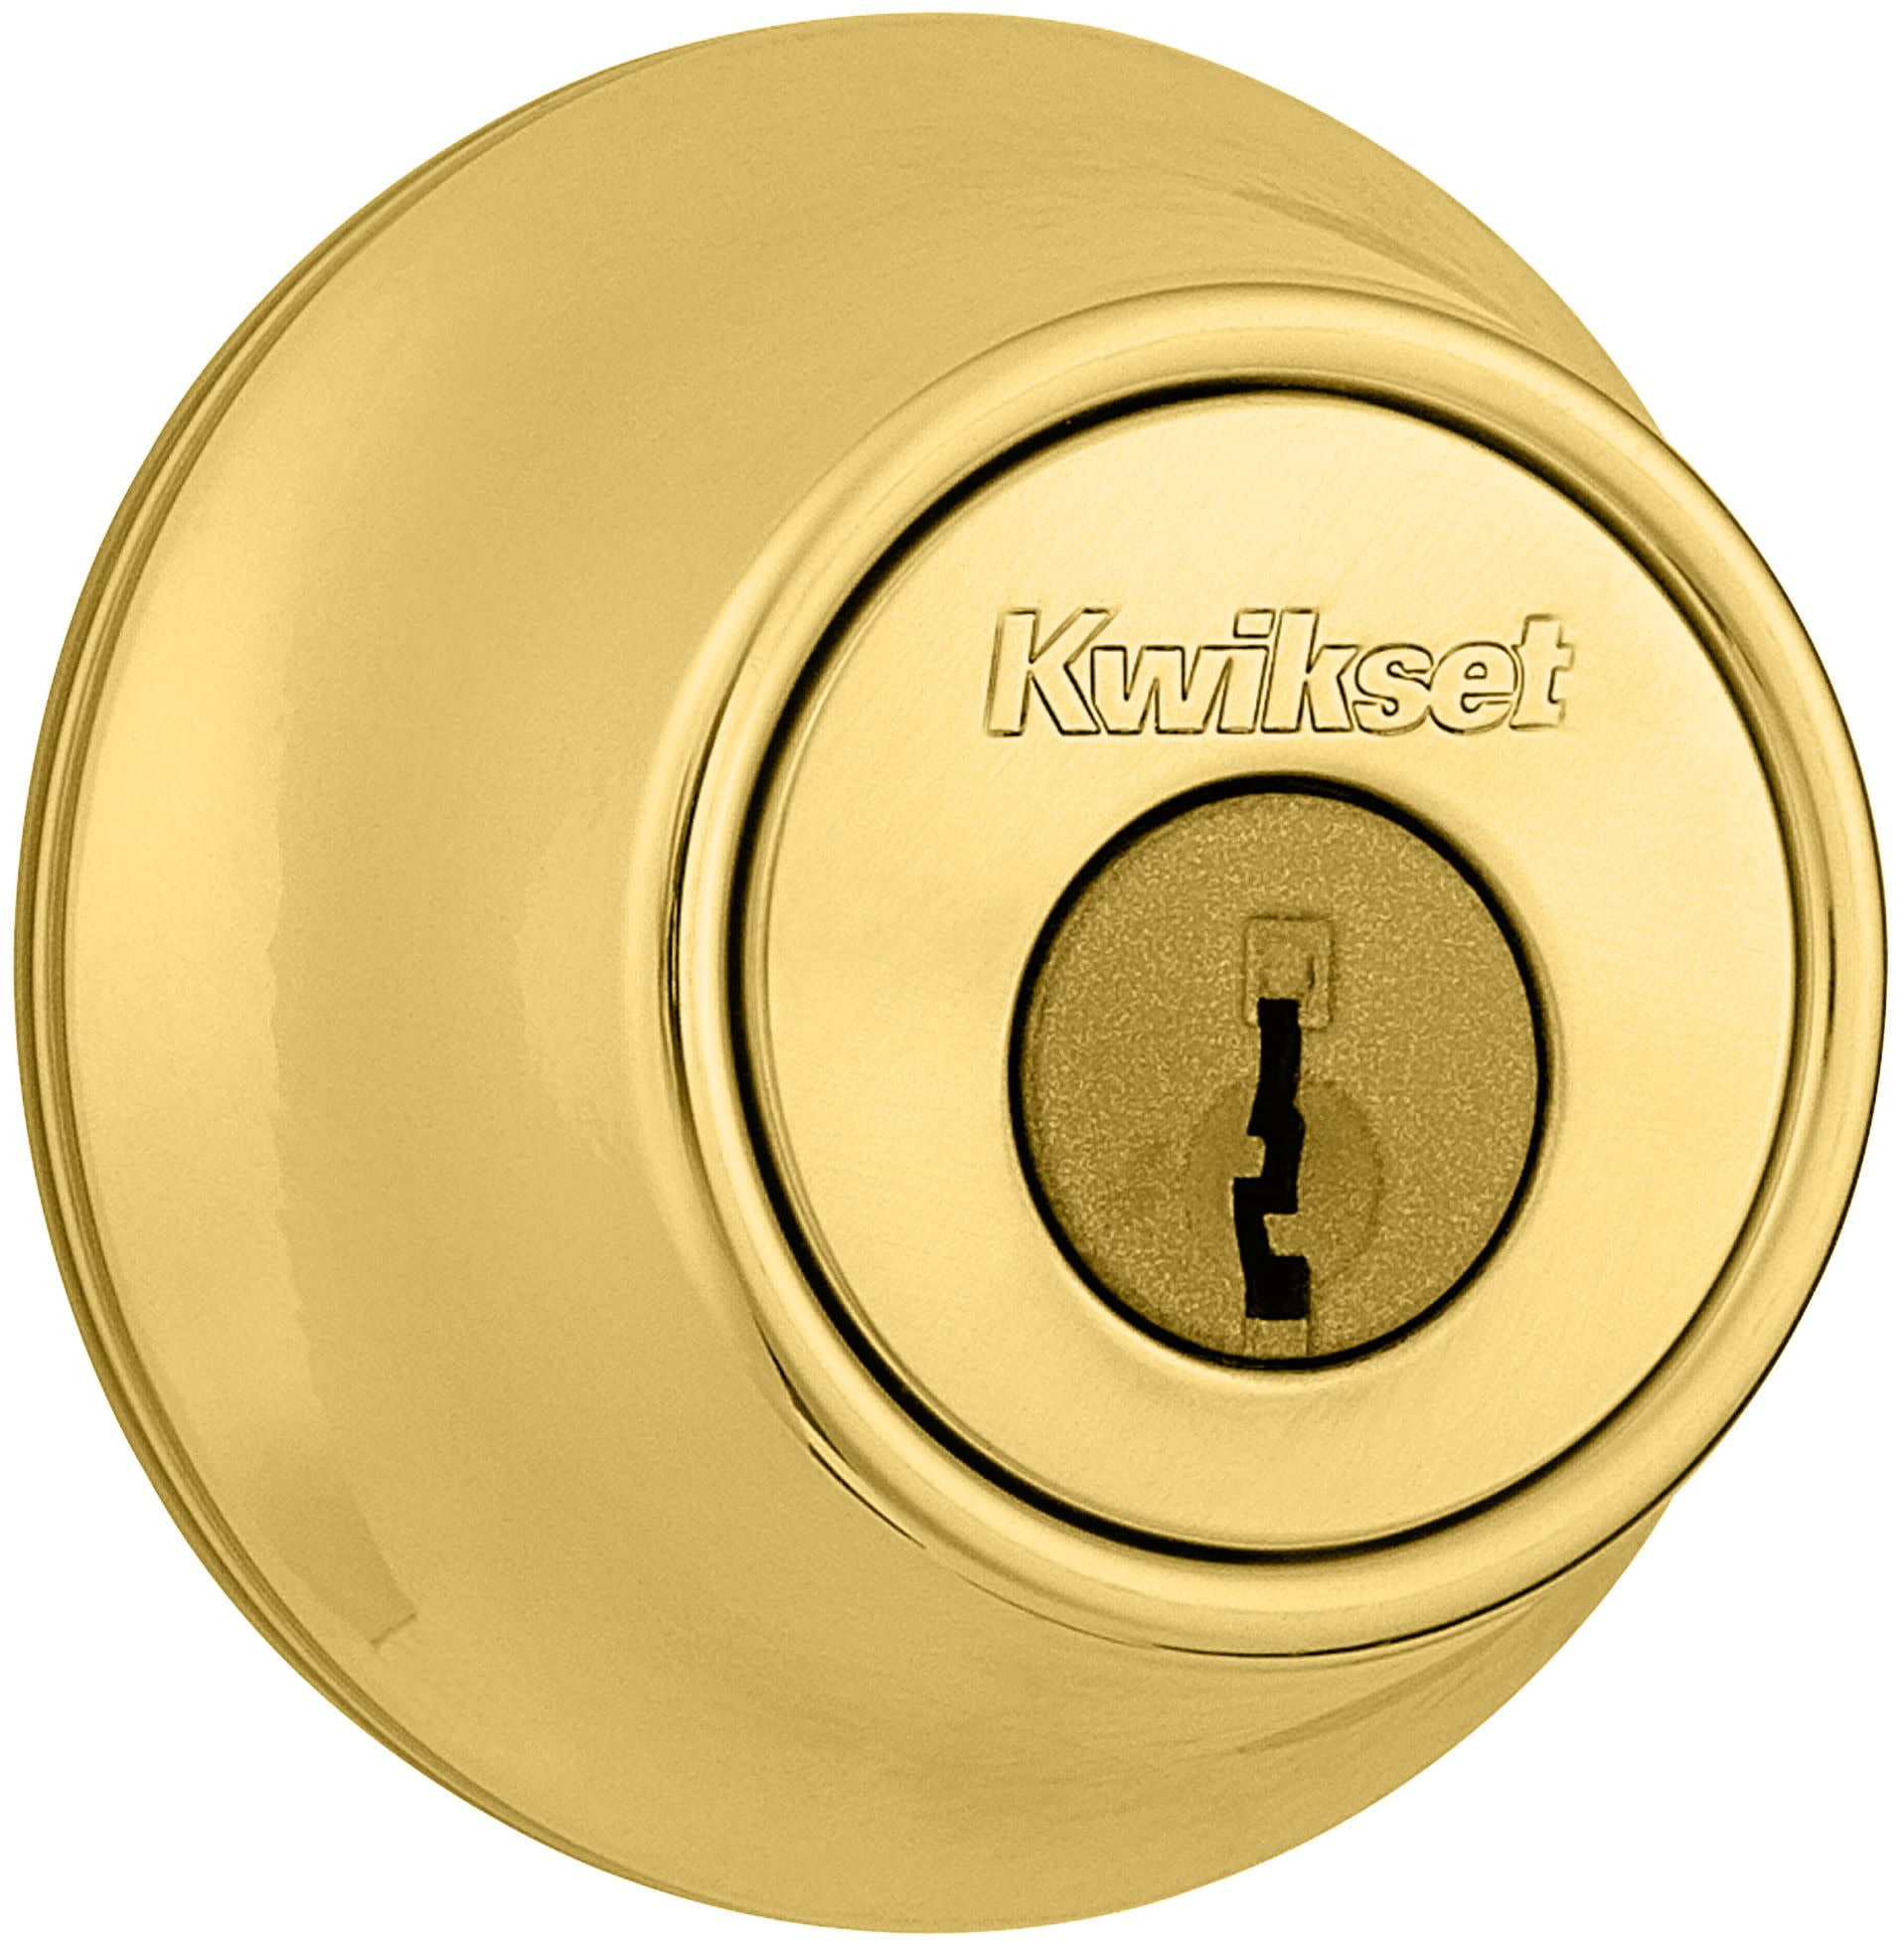 Kwikset 660 3RCAL RCS Single Cylinder Deadbolt in Polished Brass 96600-013 